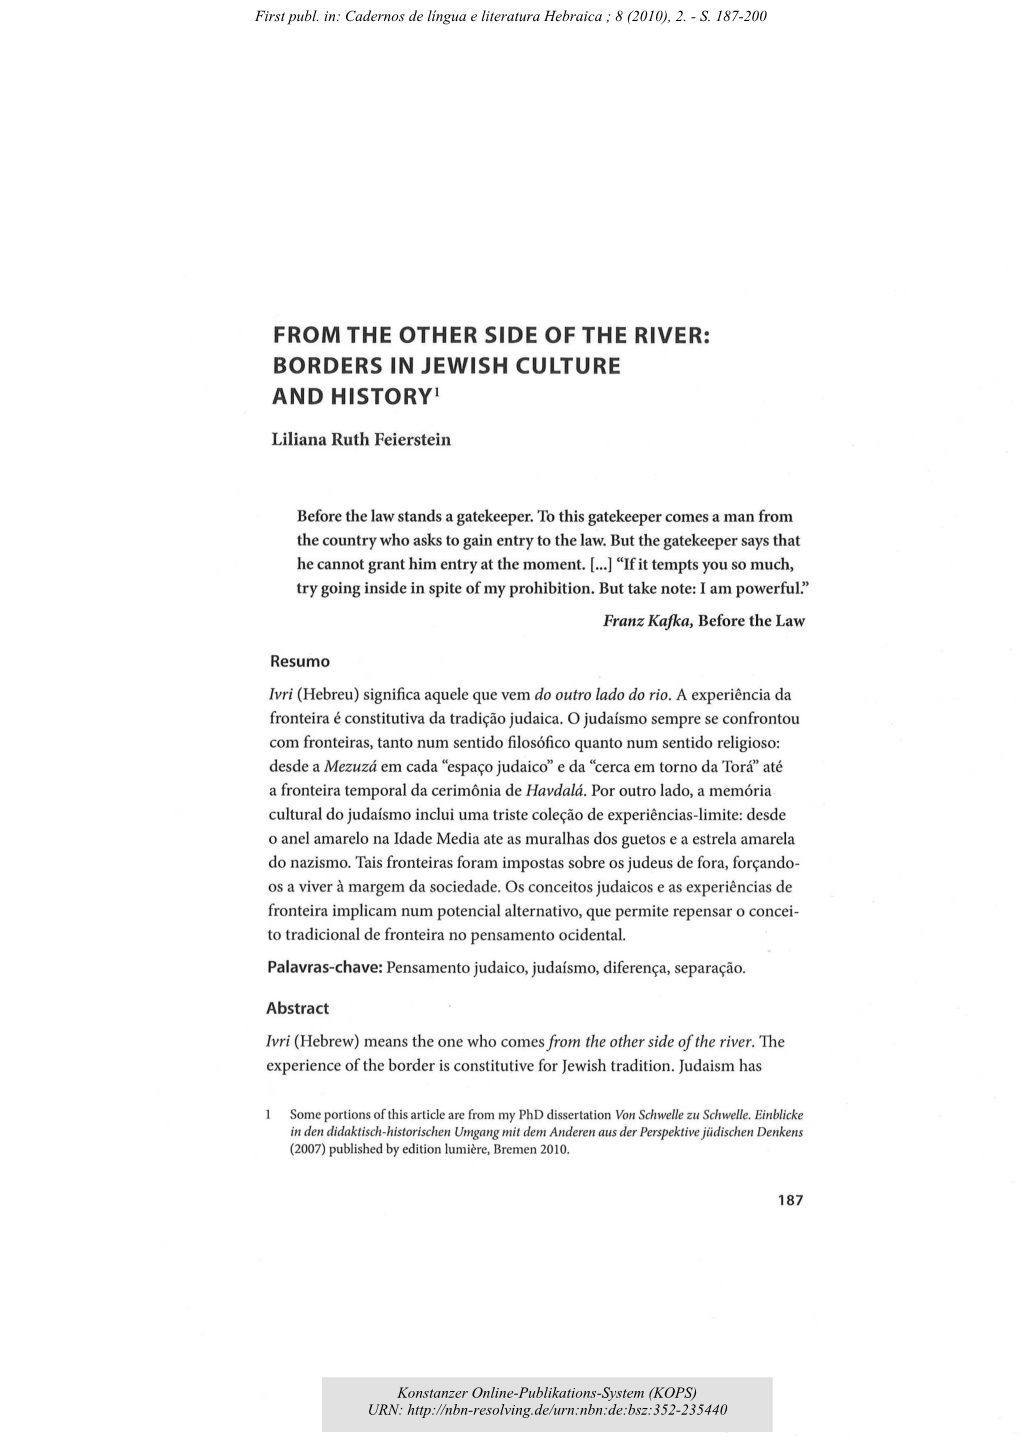 From the Other Side of the River : Borders in Jewish Culture and History